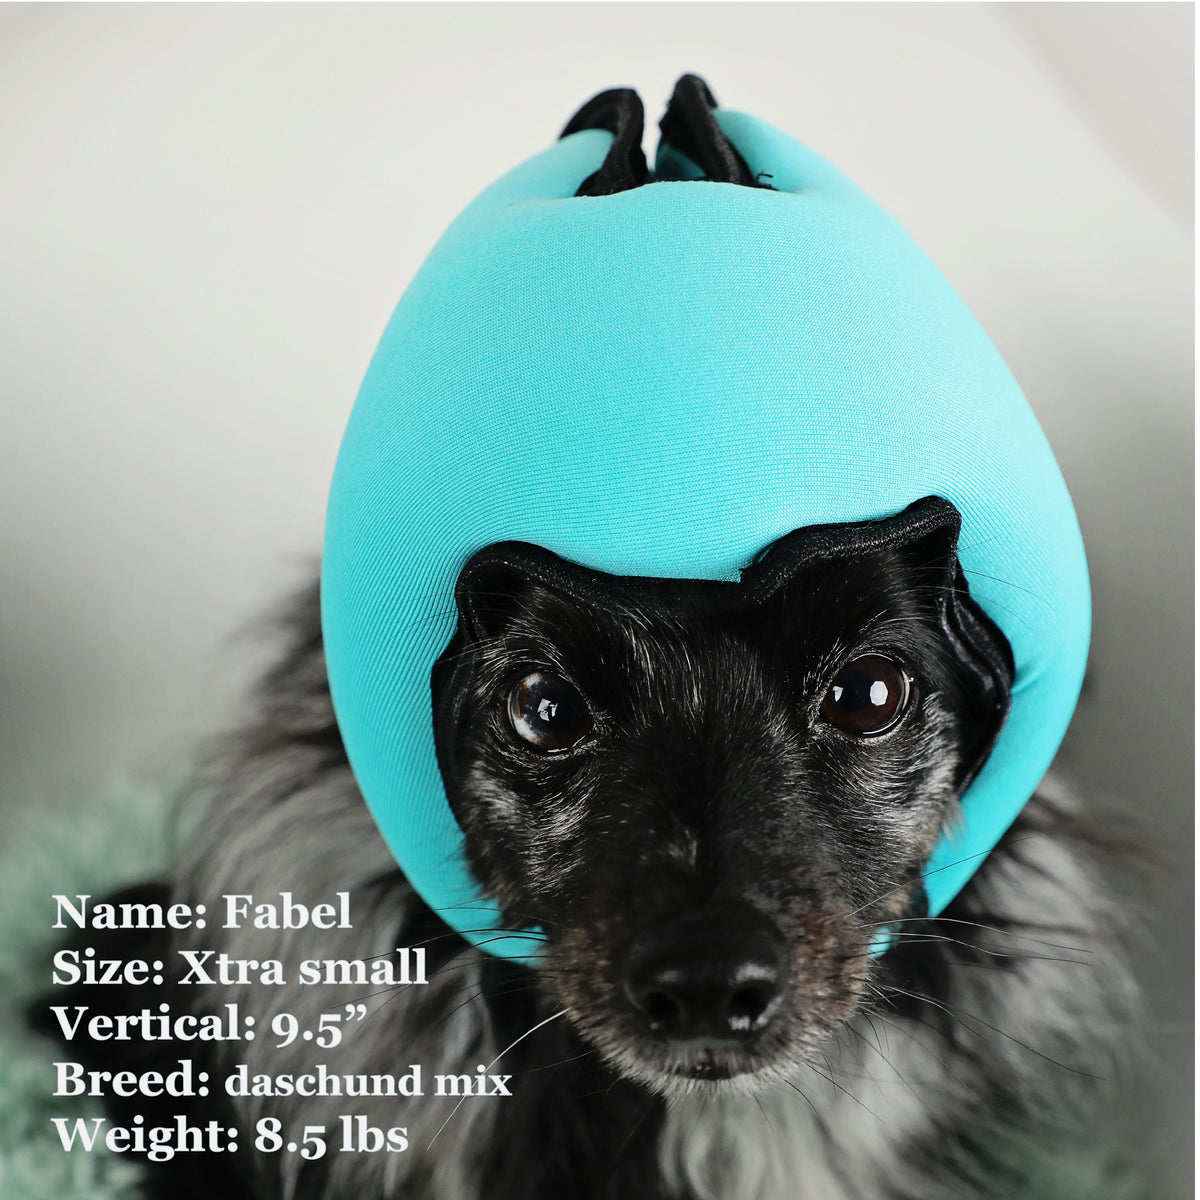 Fabel is a Daschund Mix in a Xtra Small Blue PAWNIX Noise Cancelling Headset for dogs